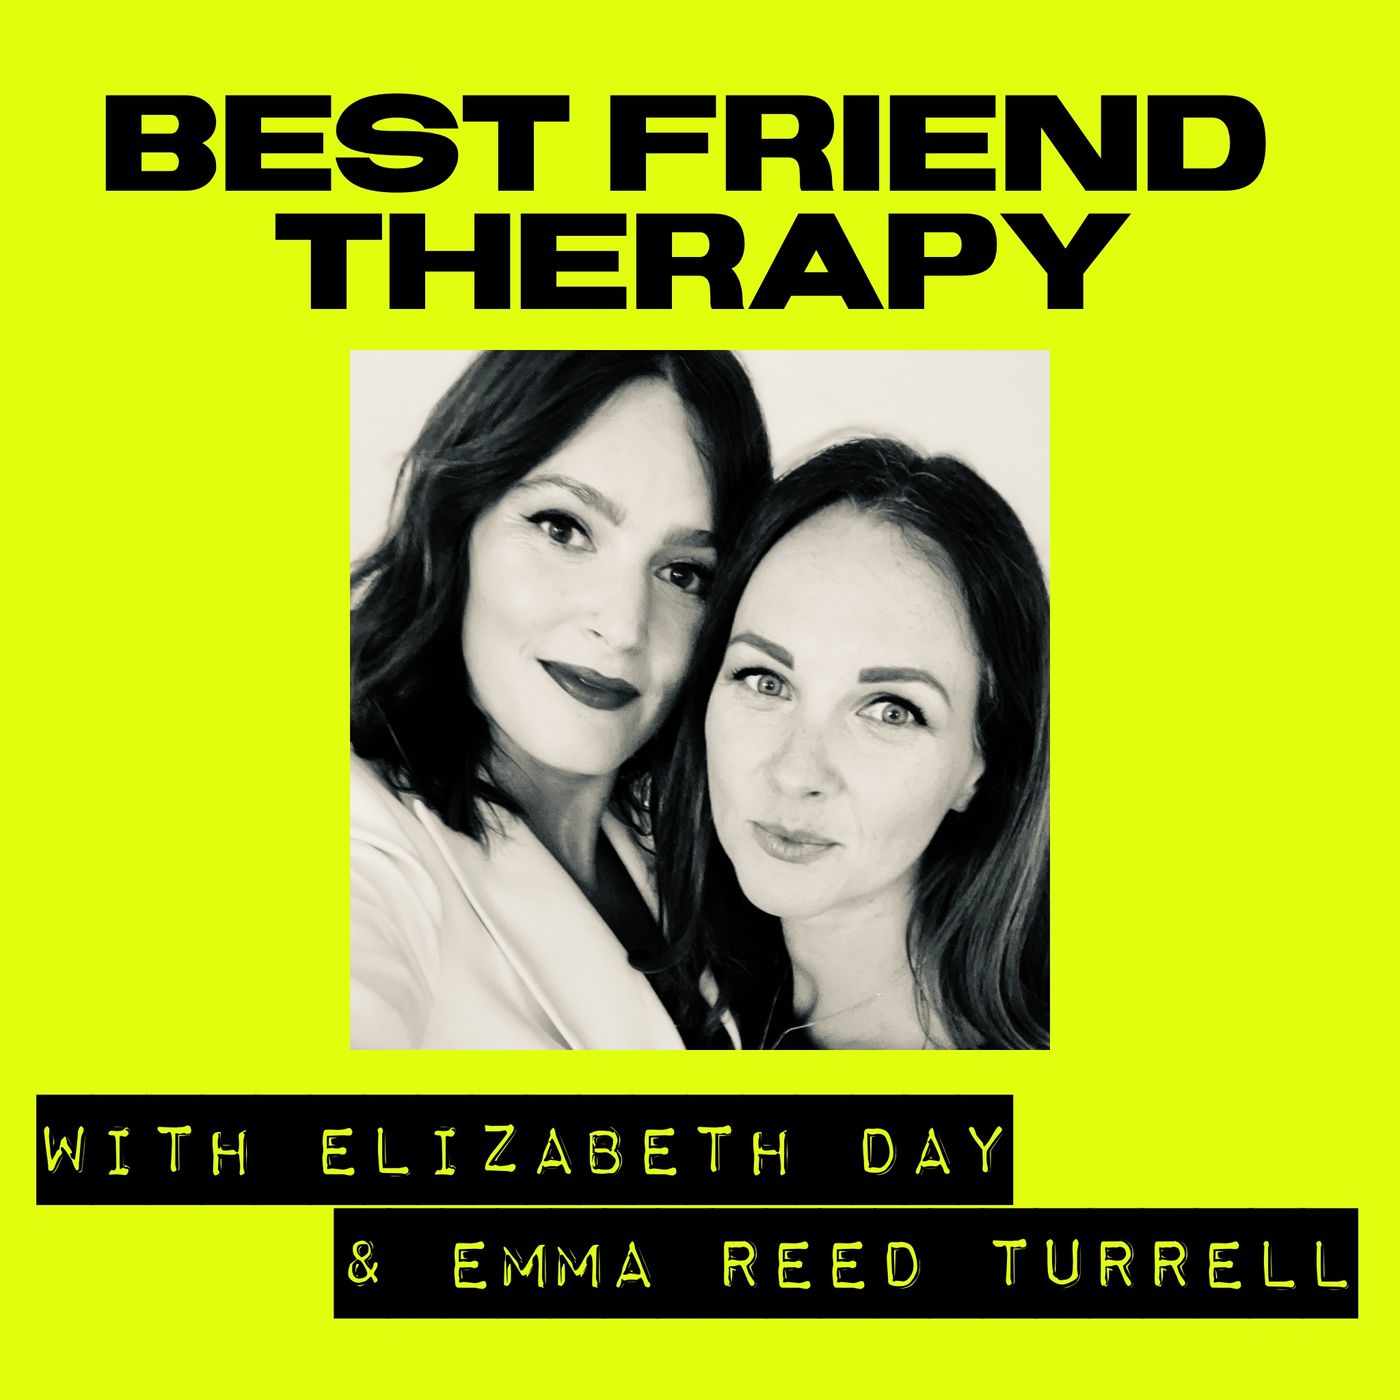 S6, Ep 6 Best Friend Therapy: Break-ups with friends and family - Can you end a friendship? How do you change old family dynamics?